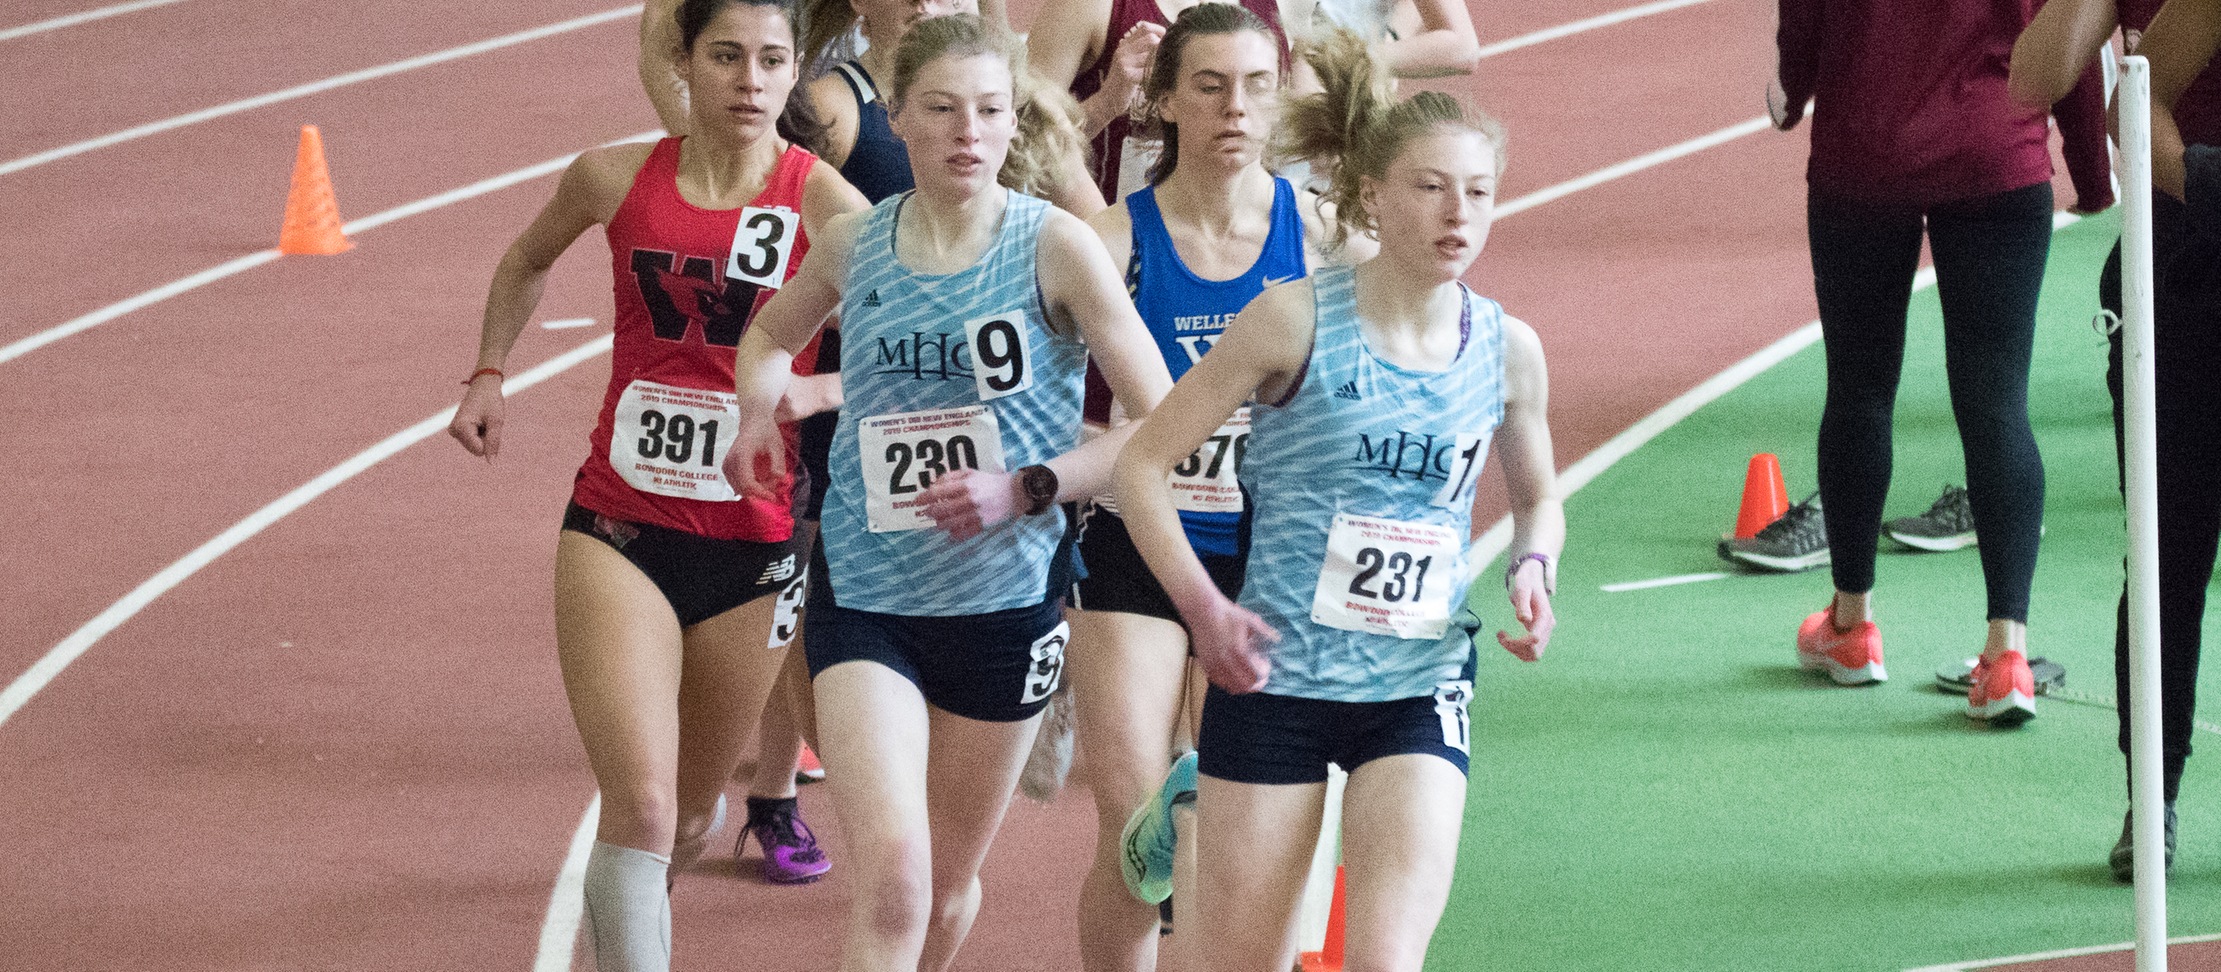 Rieders' Earn All-Region Track and Field Honors in Women's 5k at Division III New England Championships